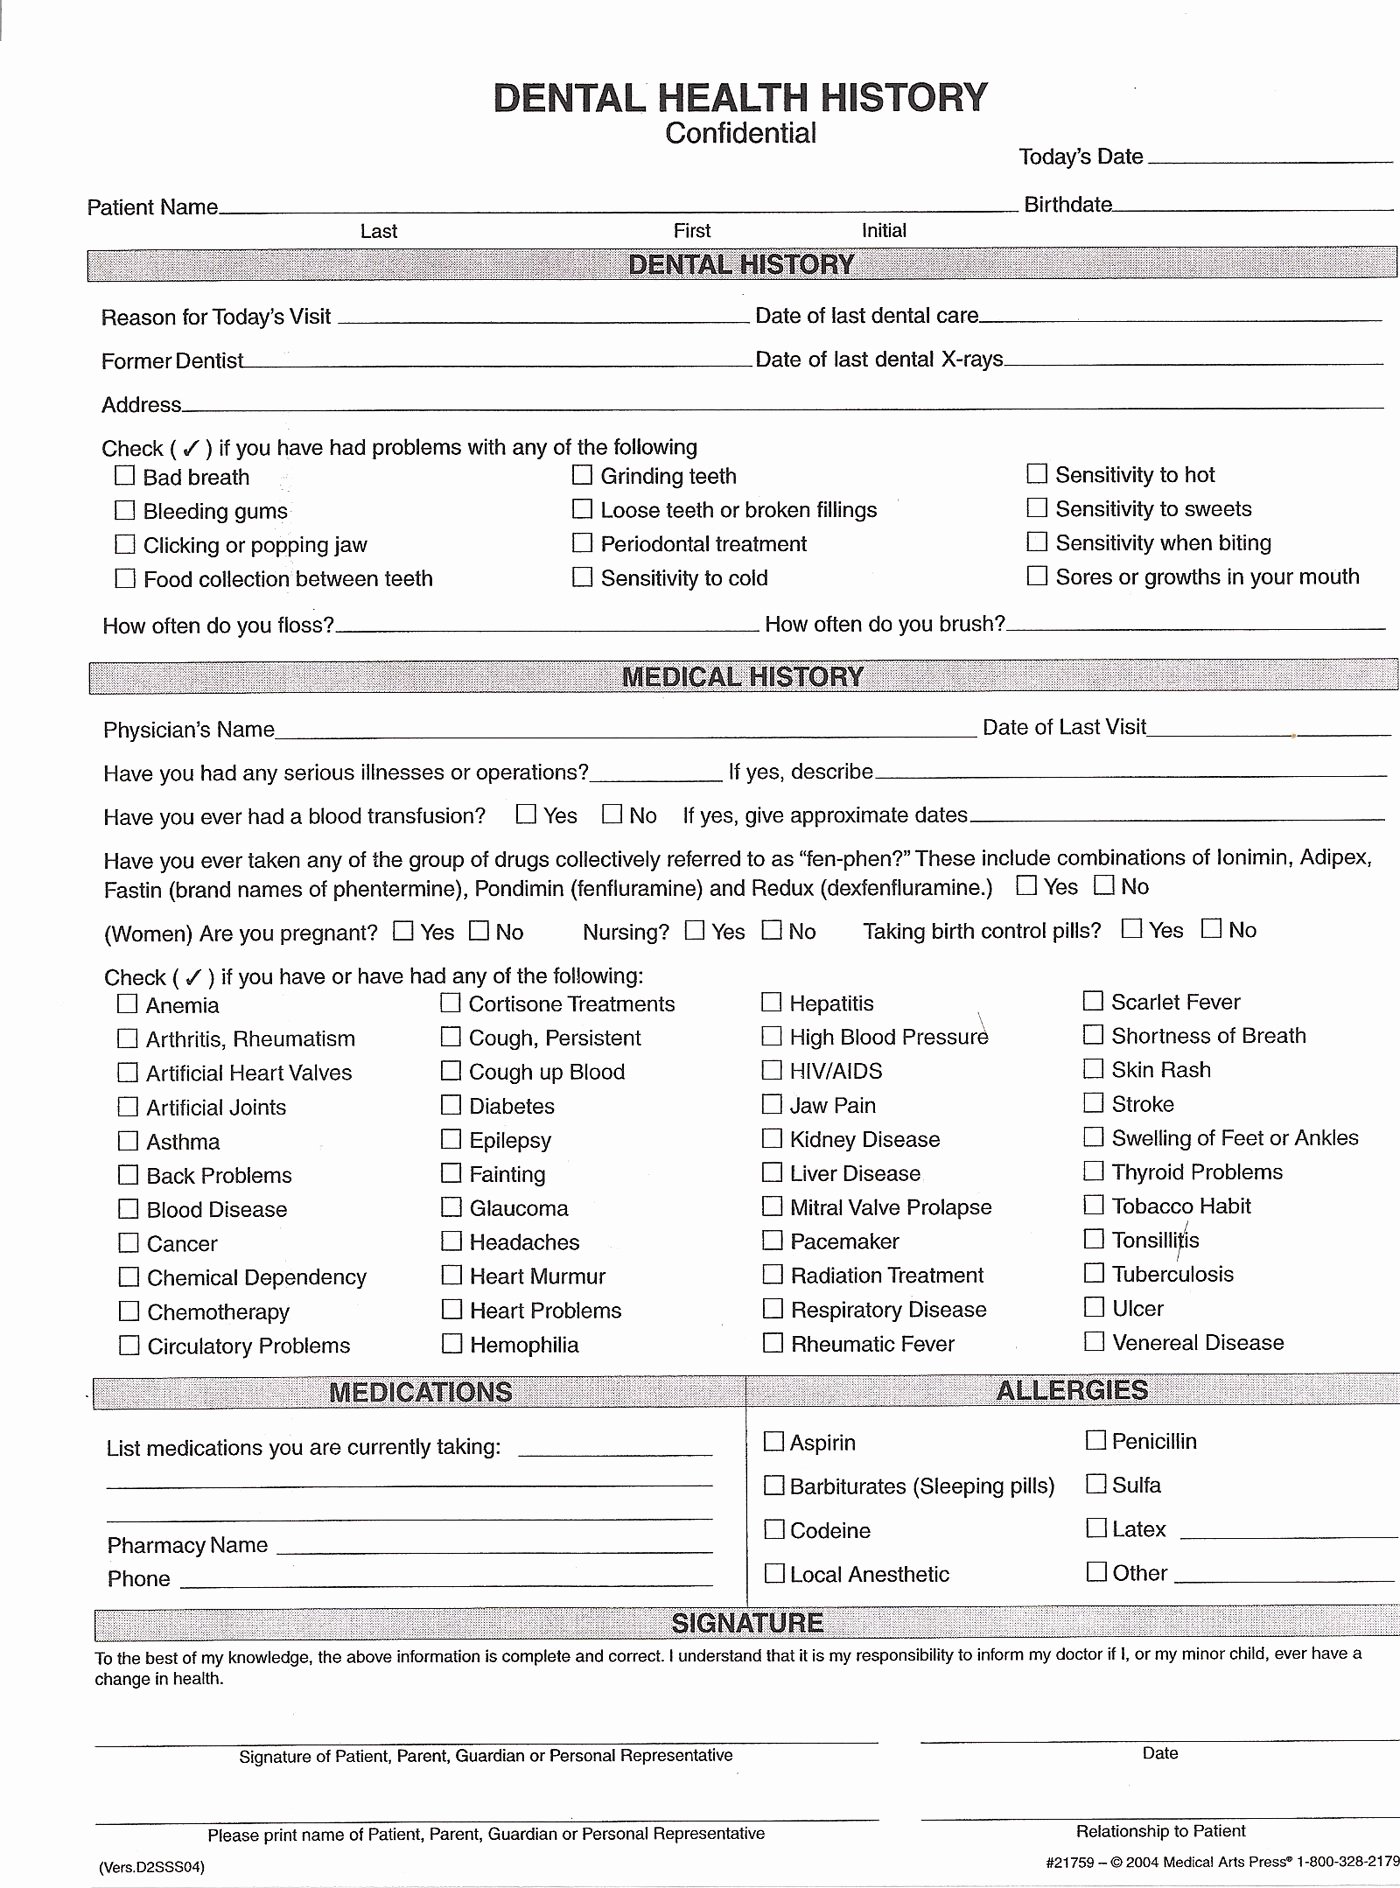 Medical History forms